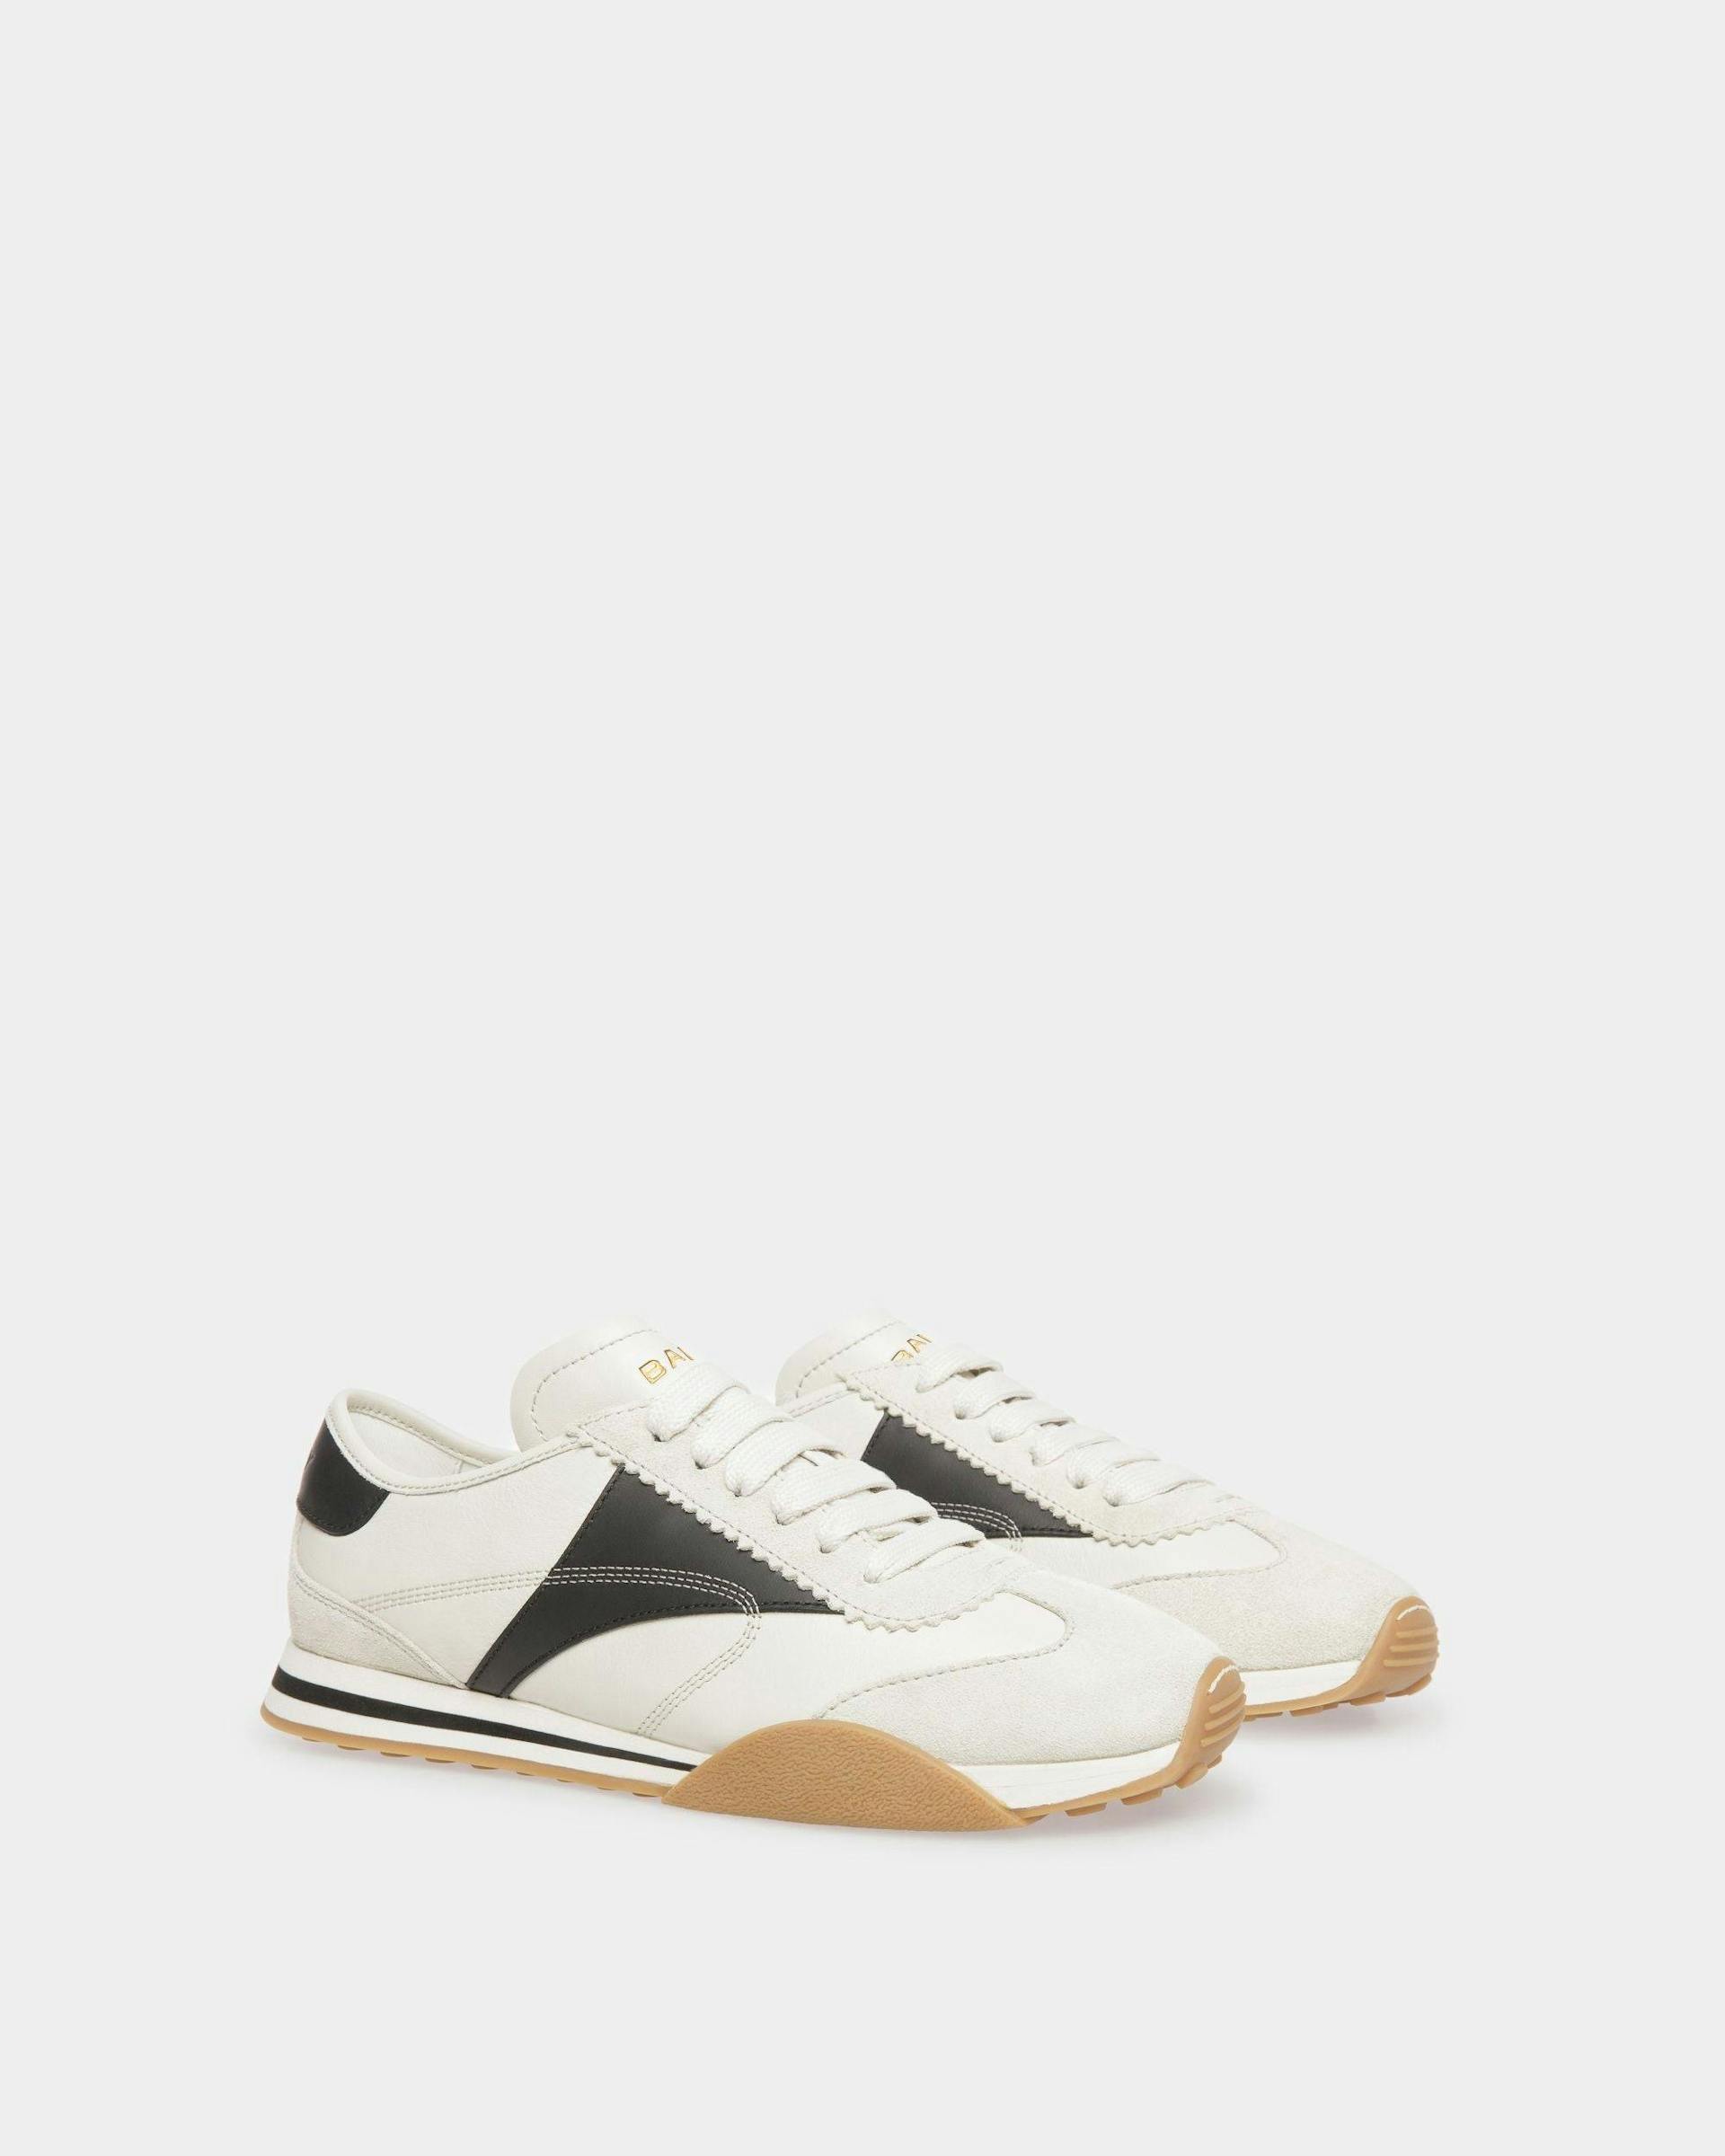 Men's Sussex Sneakers In Black And Dusty White Leather | Bally | Still Life 3/4 Front